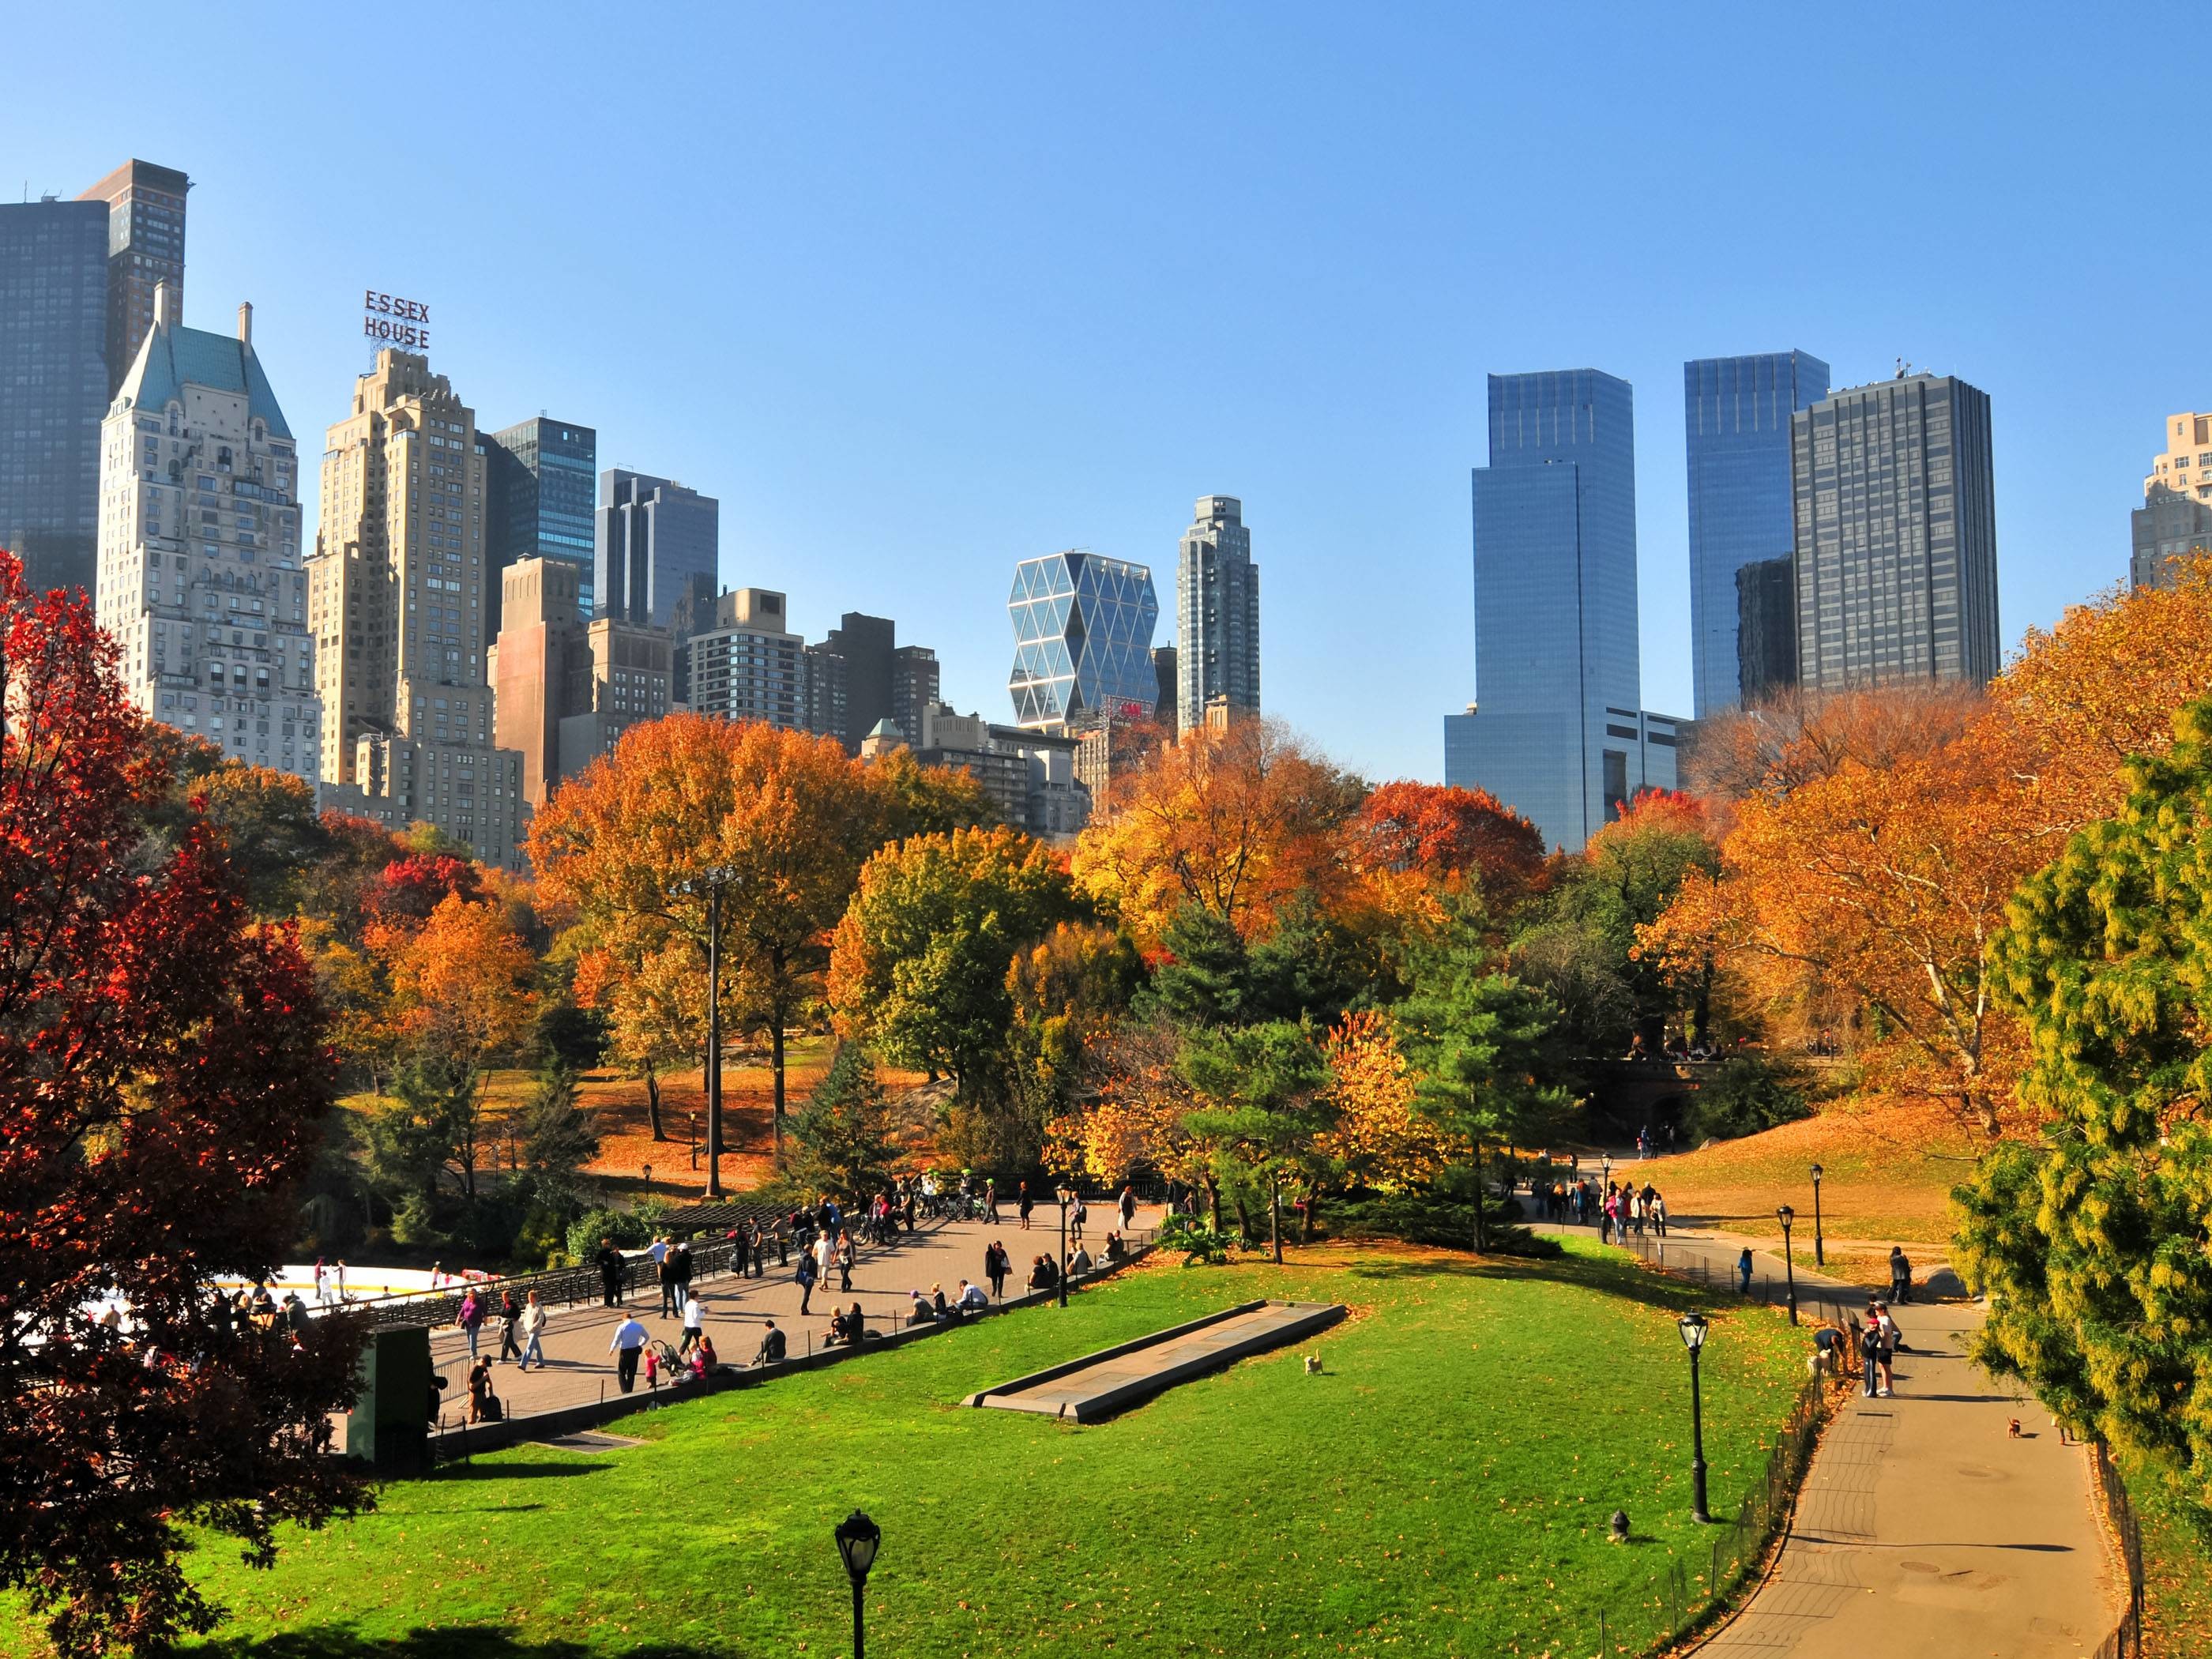 2800x2100 Central Park In Nyc During Autumn | HQ Wallpapers for PC